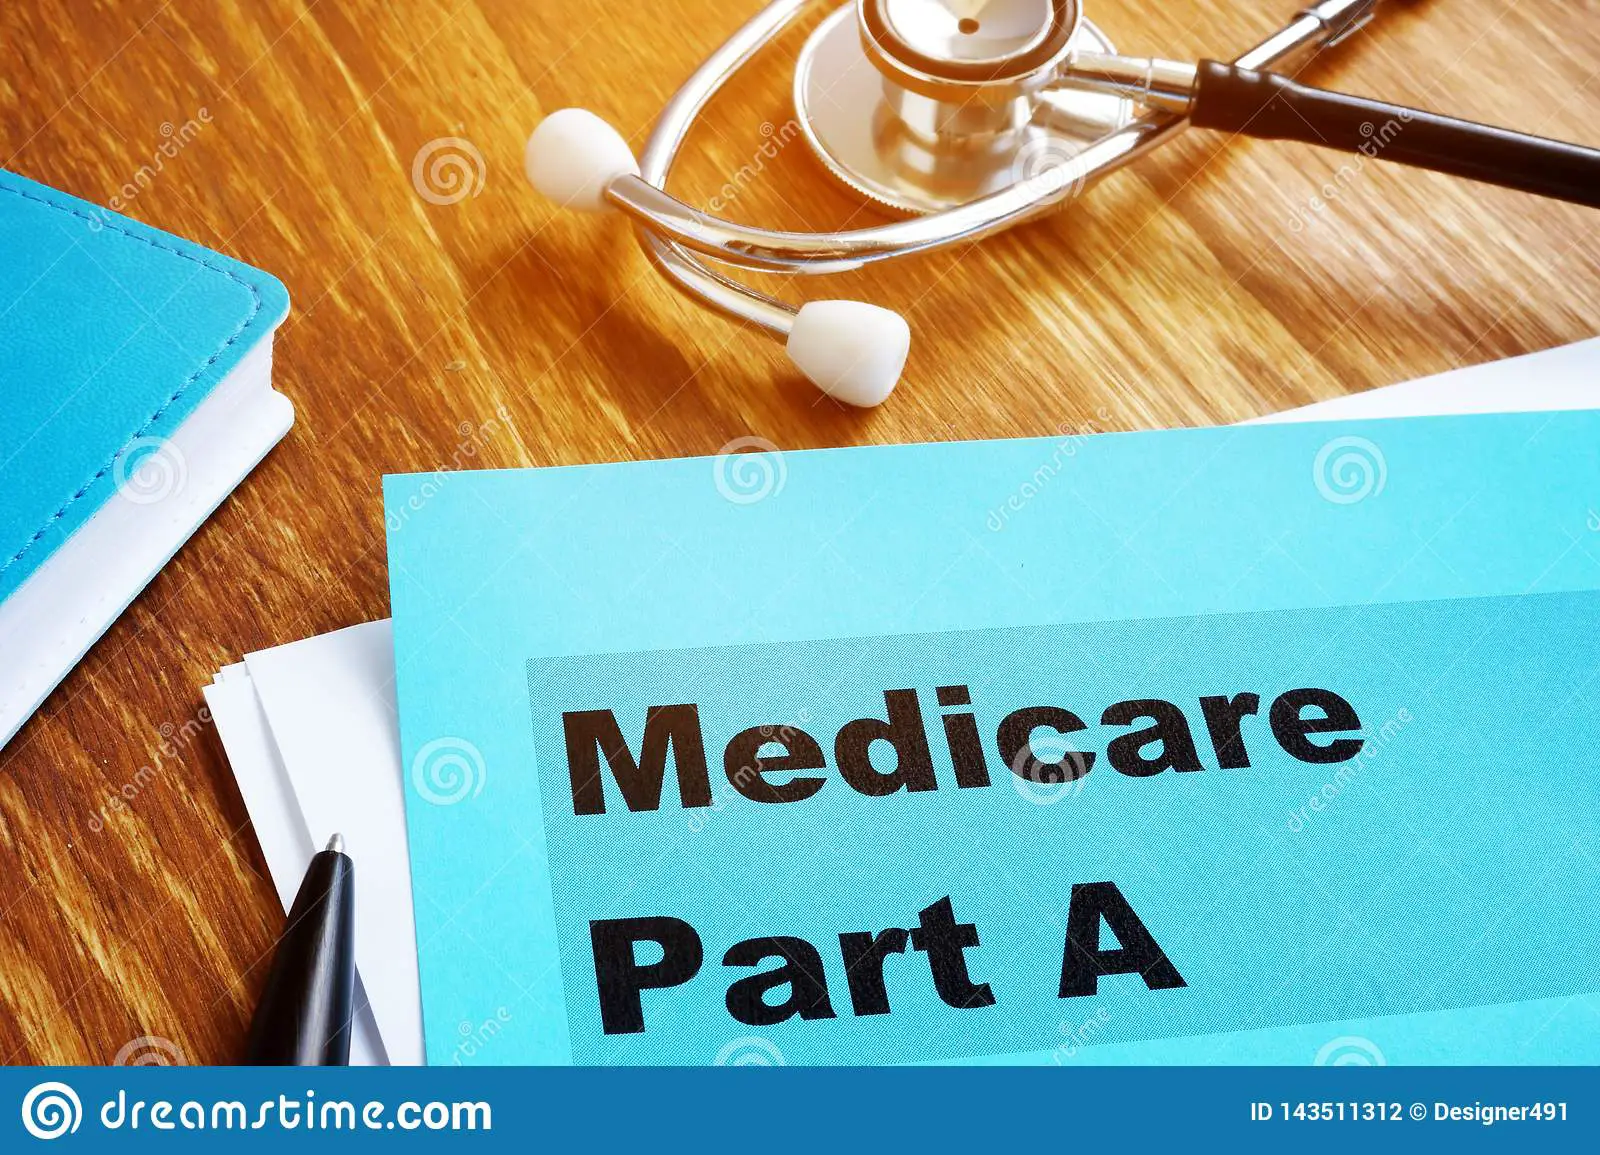 Medicare Part A Documents With Stethoscope Stock Photo ...